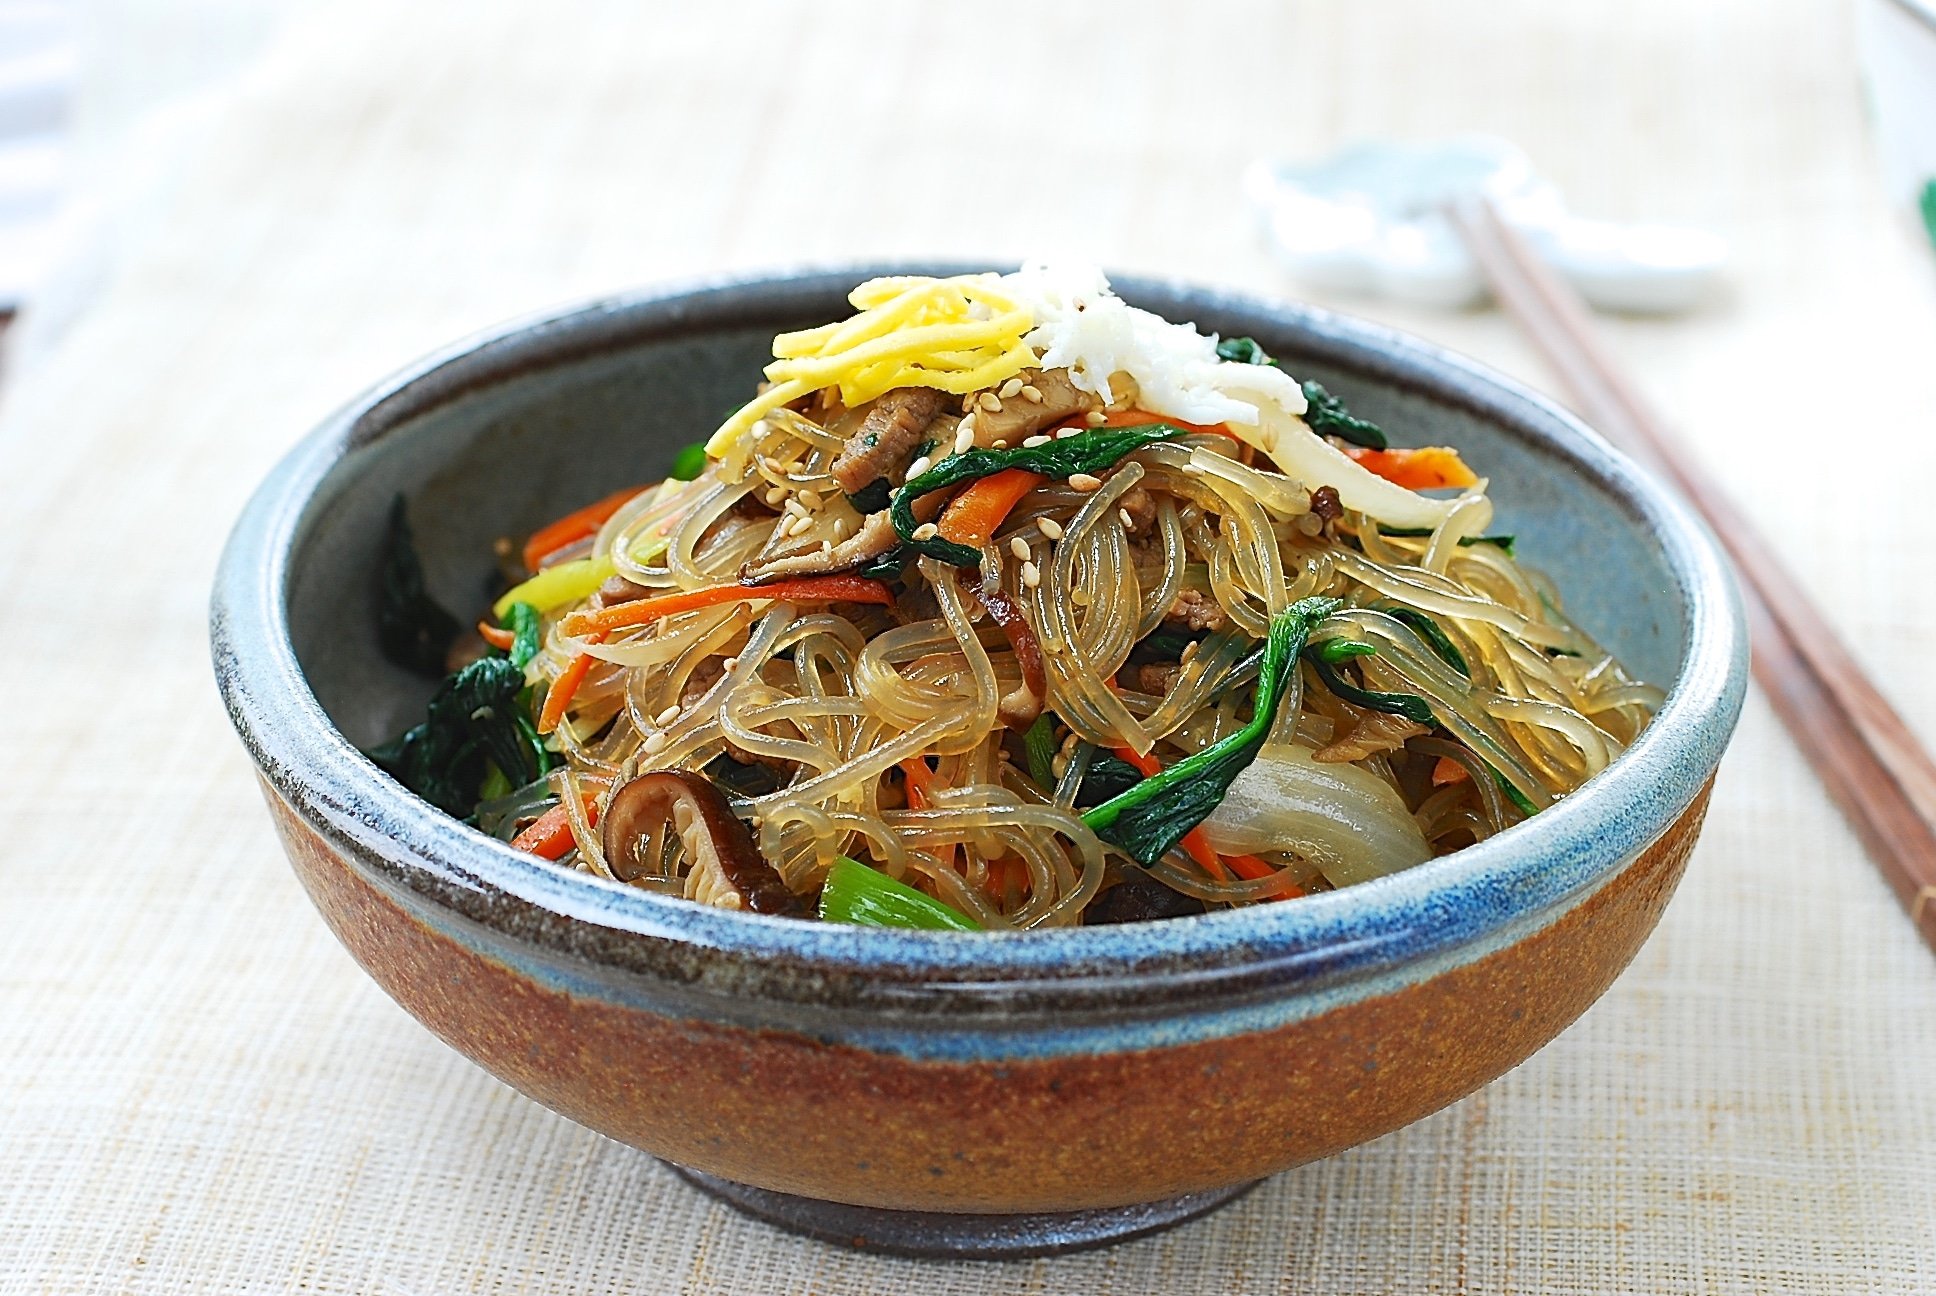 DSC 1052 1 - Japchae (Stir-Fried Starch Noodles with Beef and Vegetables)